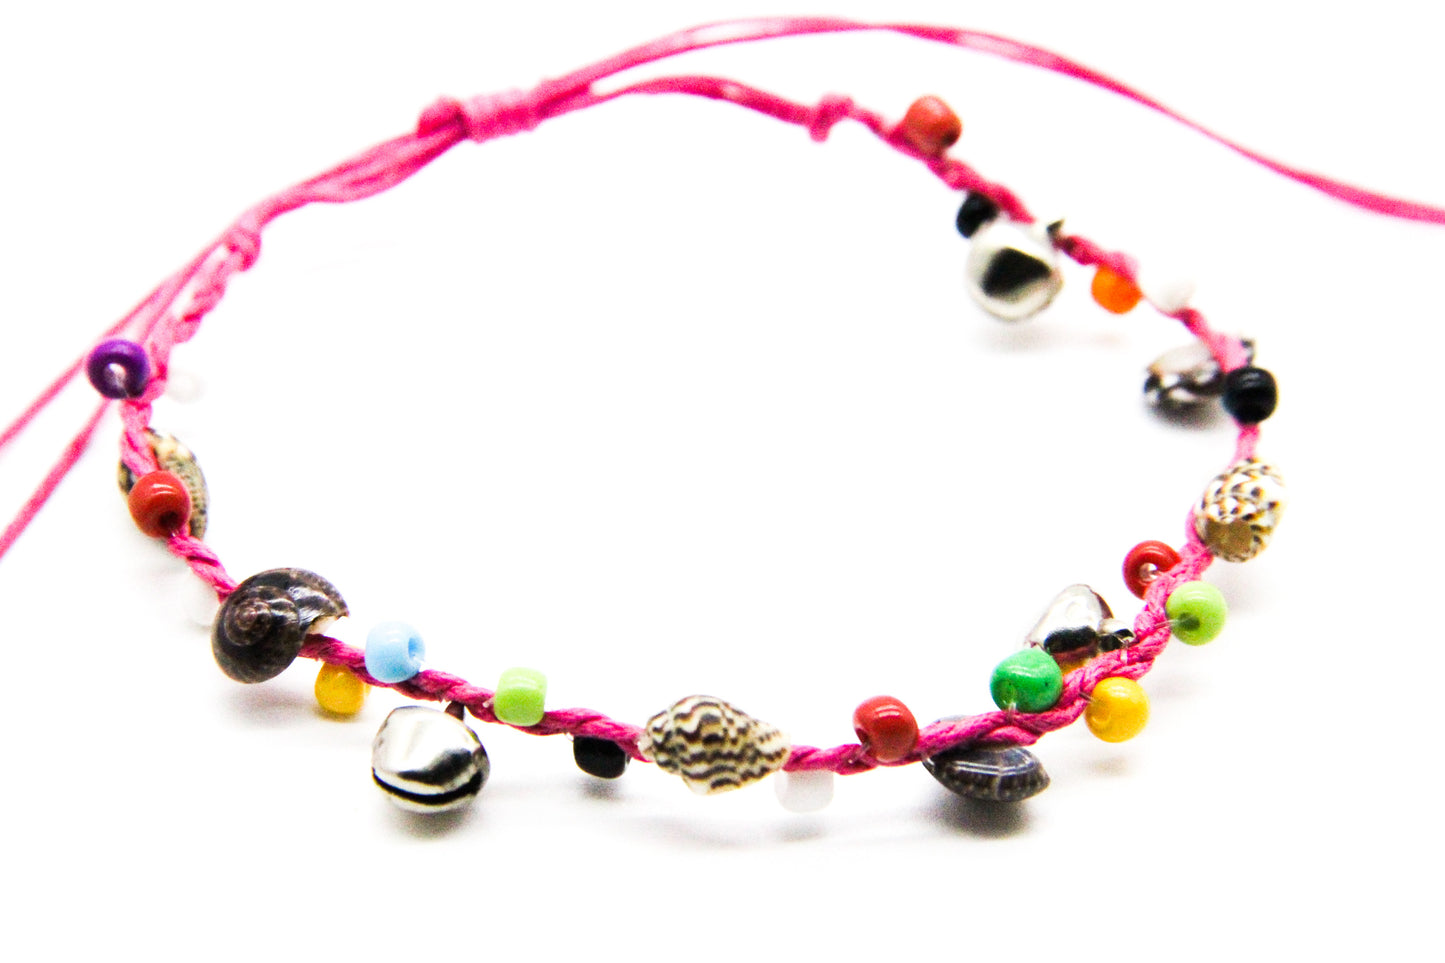 Bali Beach Charm Anklet with Beads, Bells and Shells